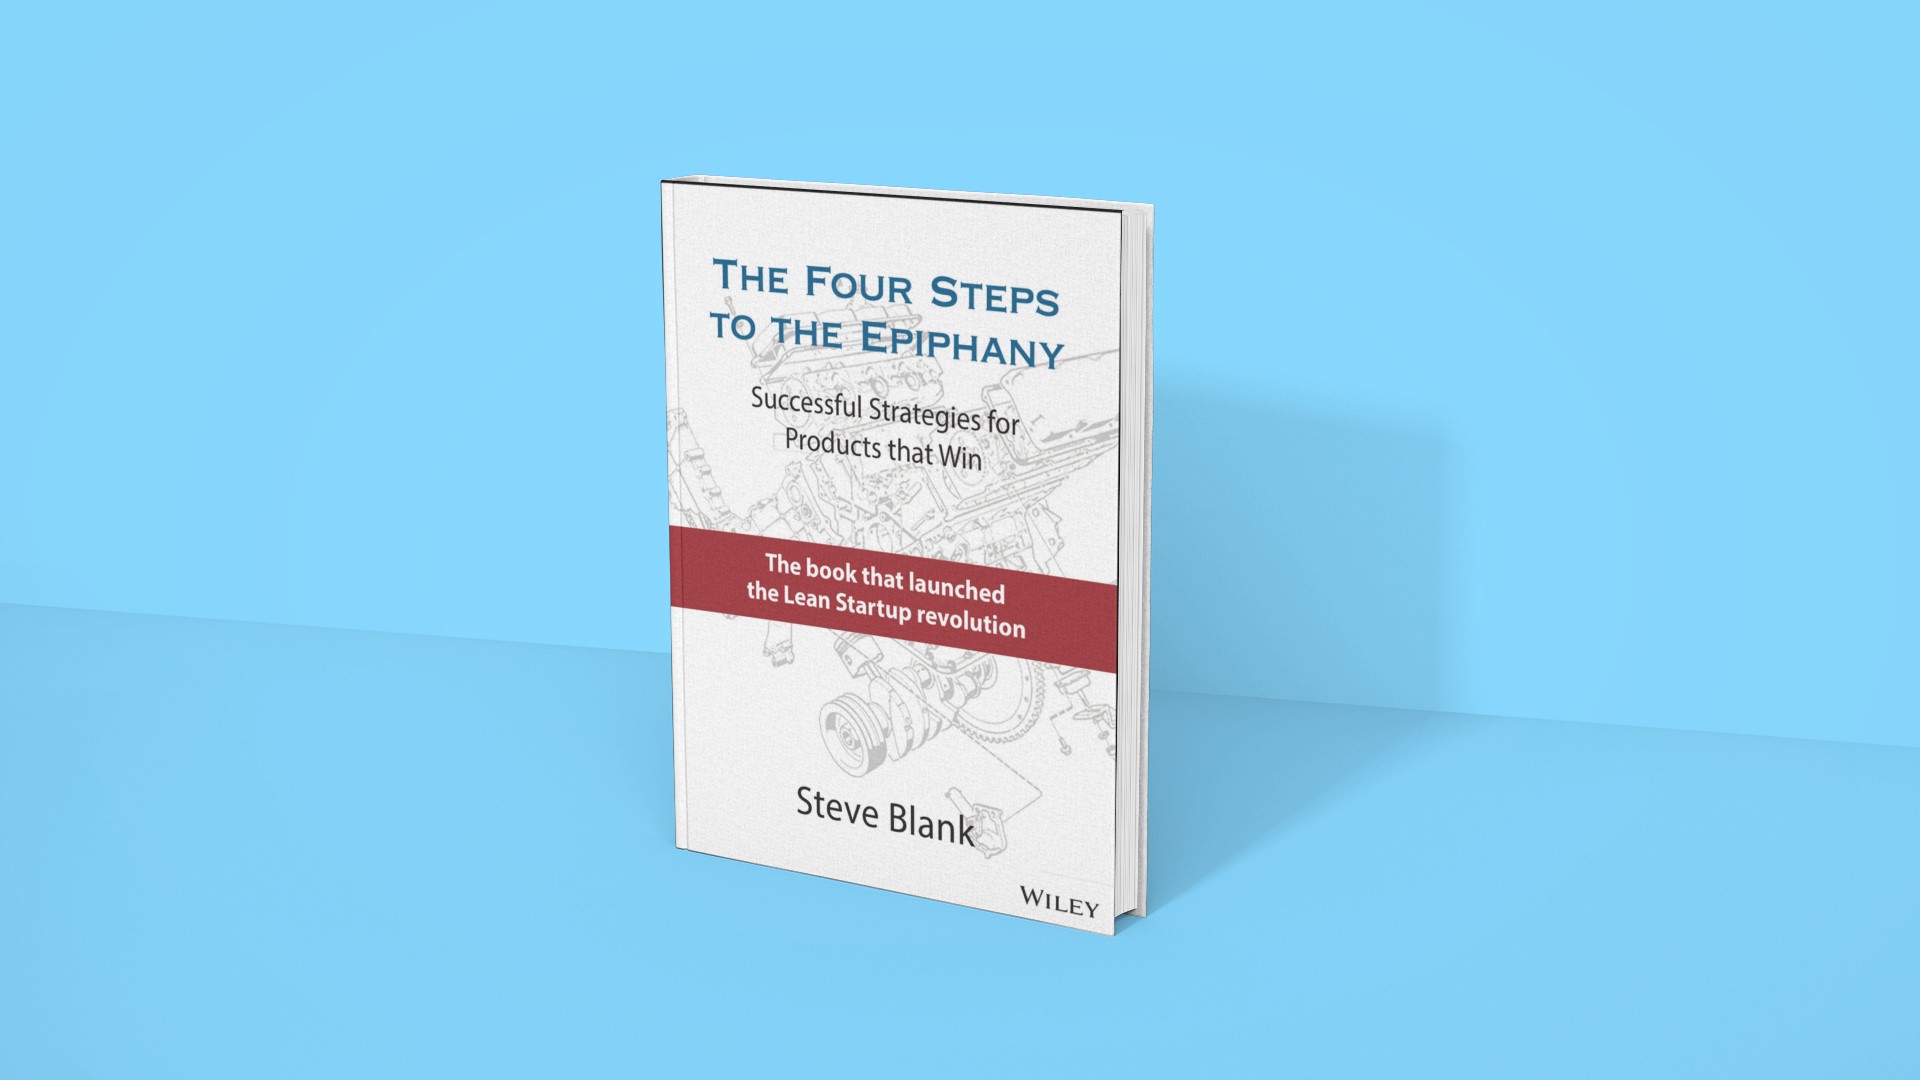 The Four Steps to the Epiphany - Steve Blank